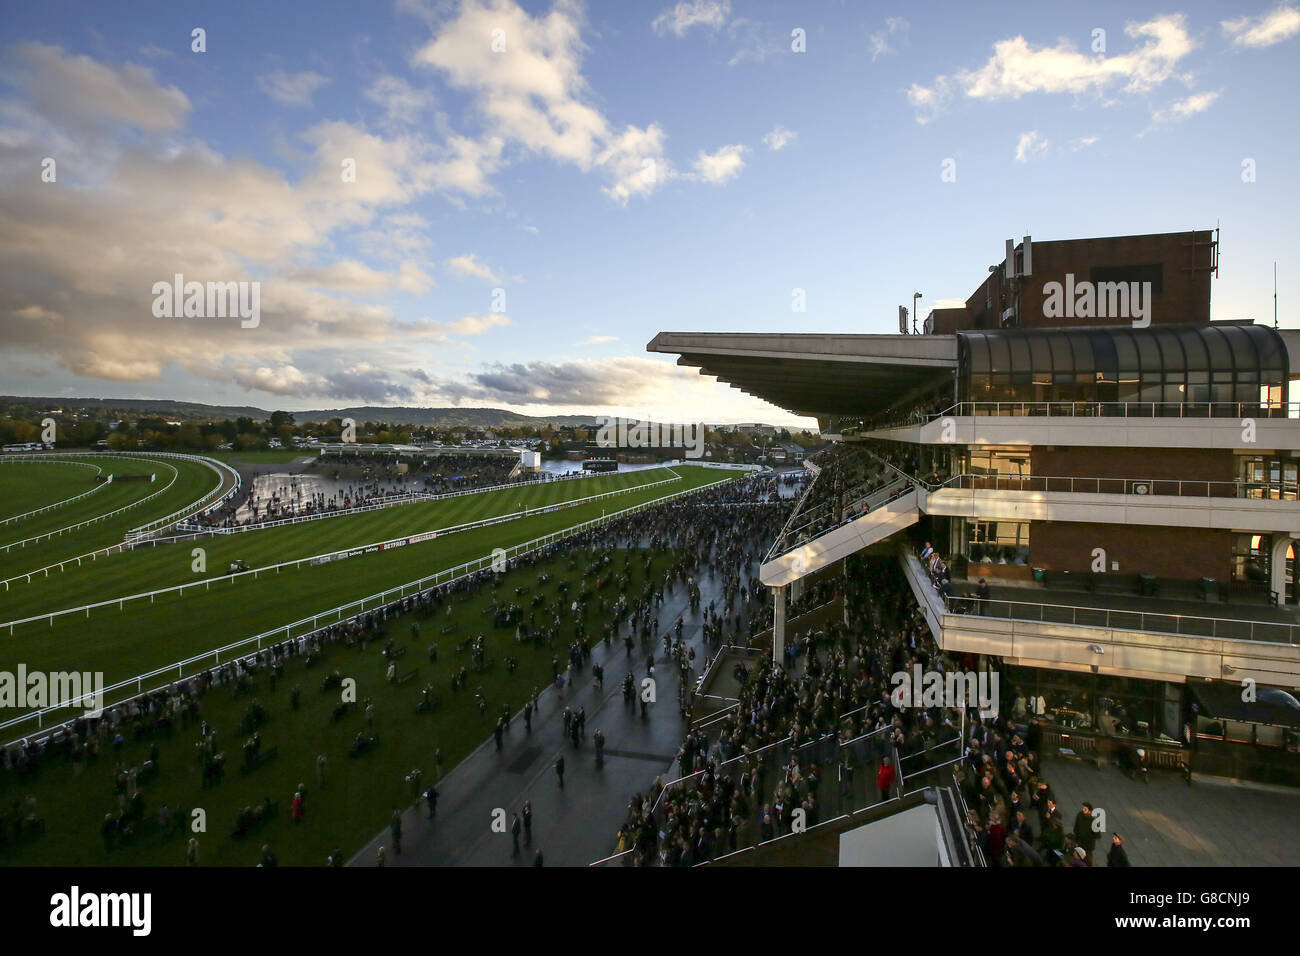 Horse Racing - The Showcase - Day Two - Cheltenham Racecourse. A general view of racegoers at Cheltenham Racecourse Stock Photo